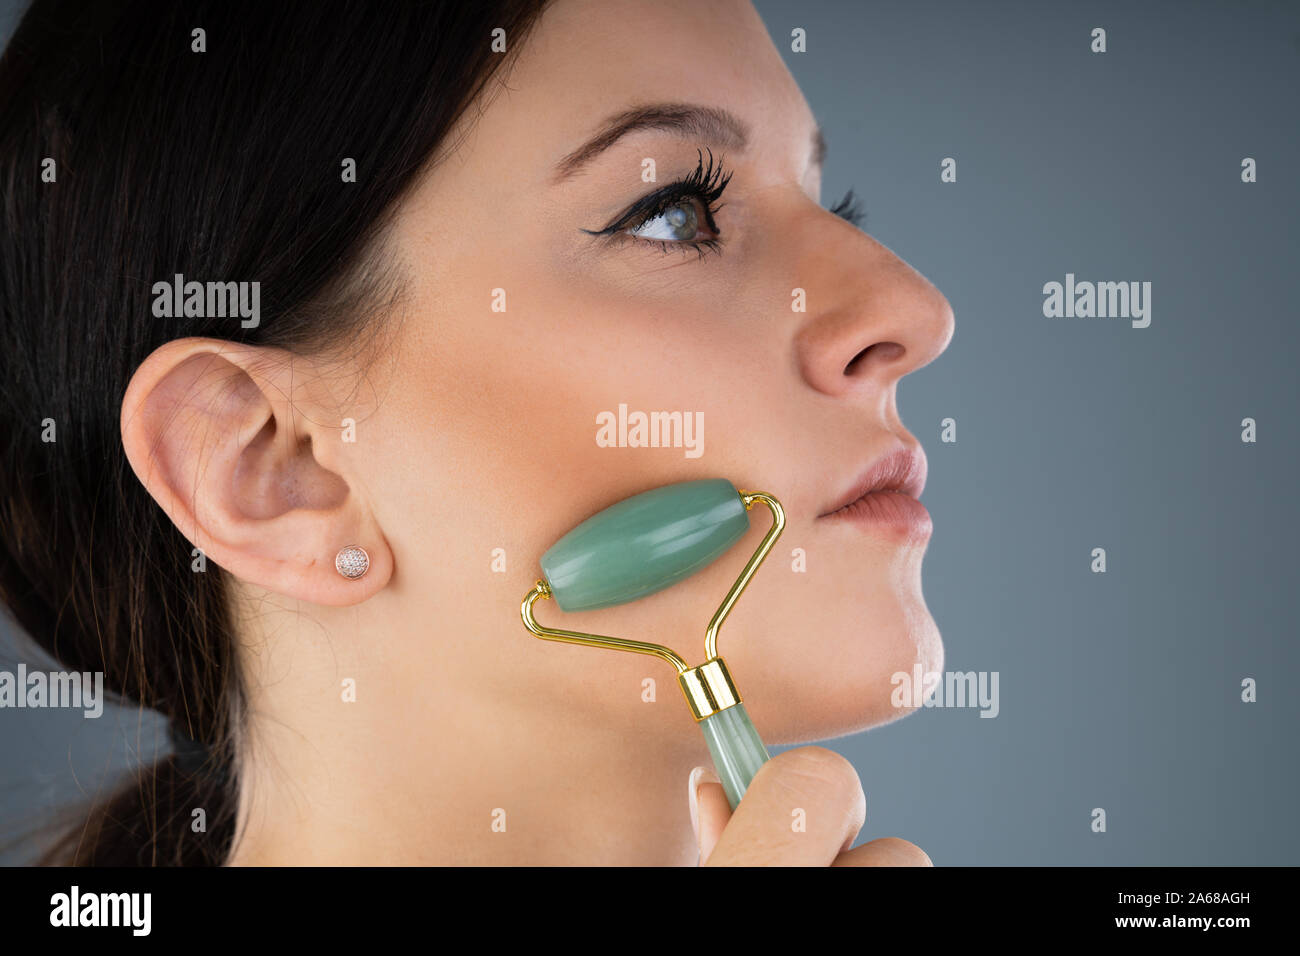 Young Woman Using Jade Roller On Her Face Stock Photo